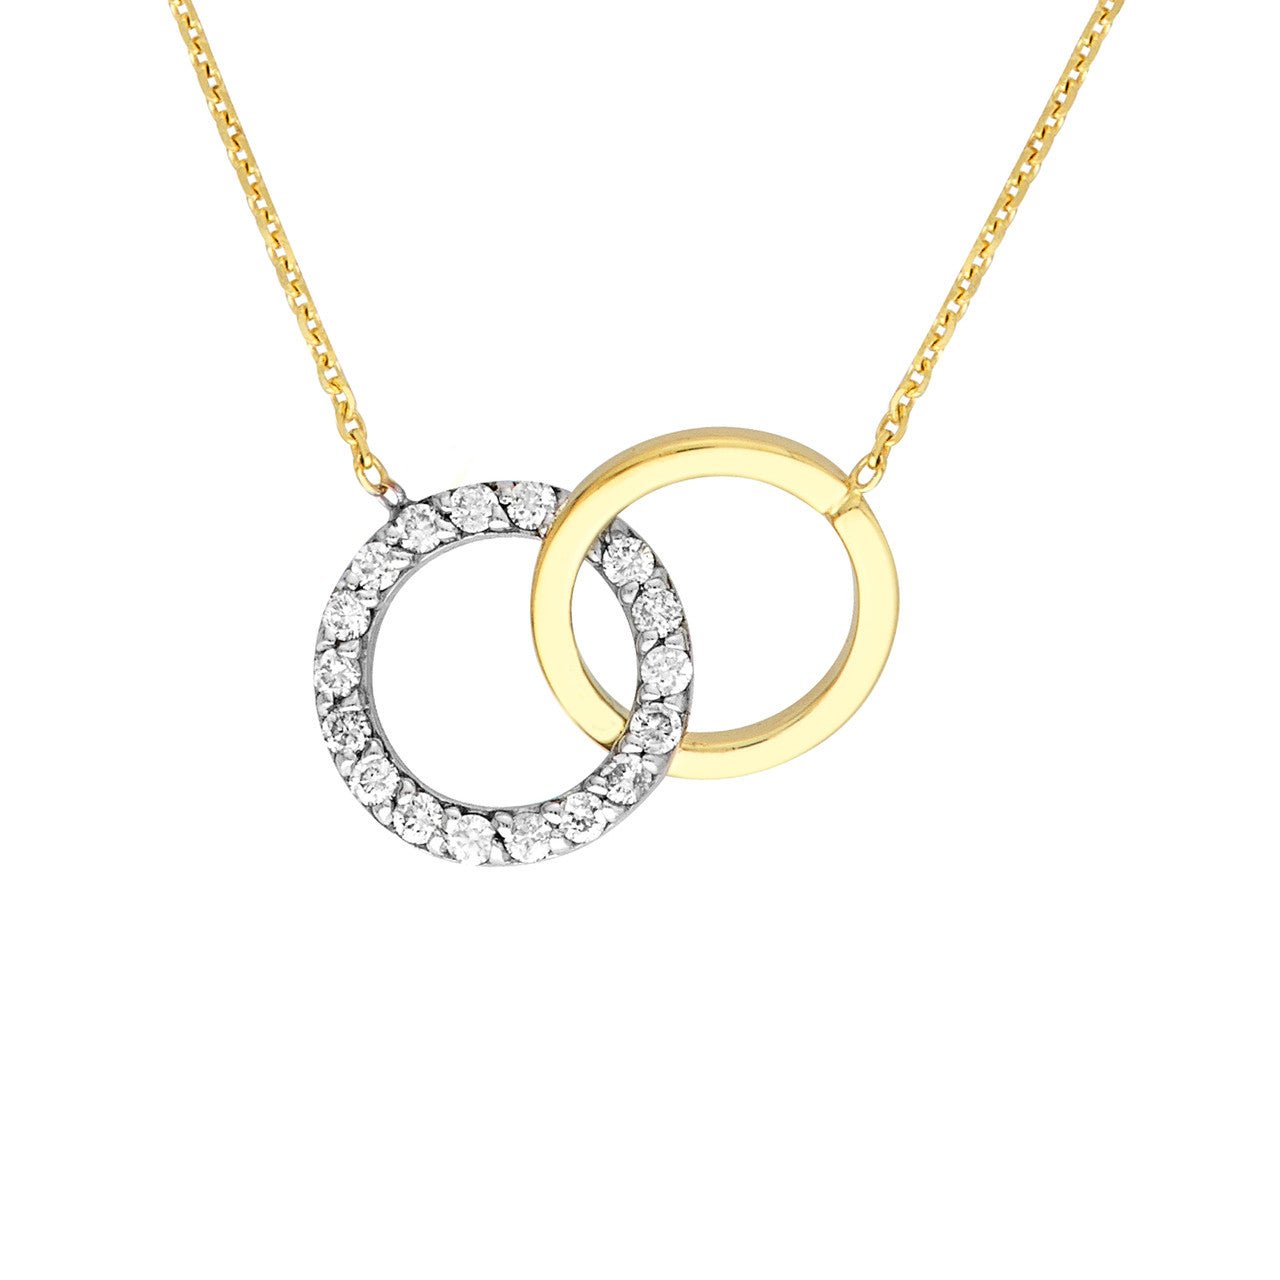 Buy Diamond and 9ct Gold Necklace, Hammered Solid Gold Circle Pendant,  0.16ct Diamond Necklace in 9ct Gold Online in India - Etsy